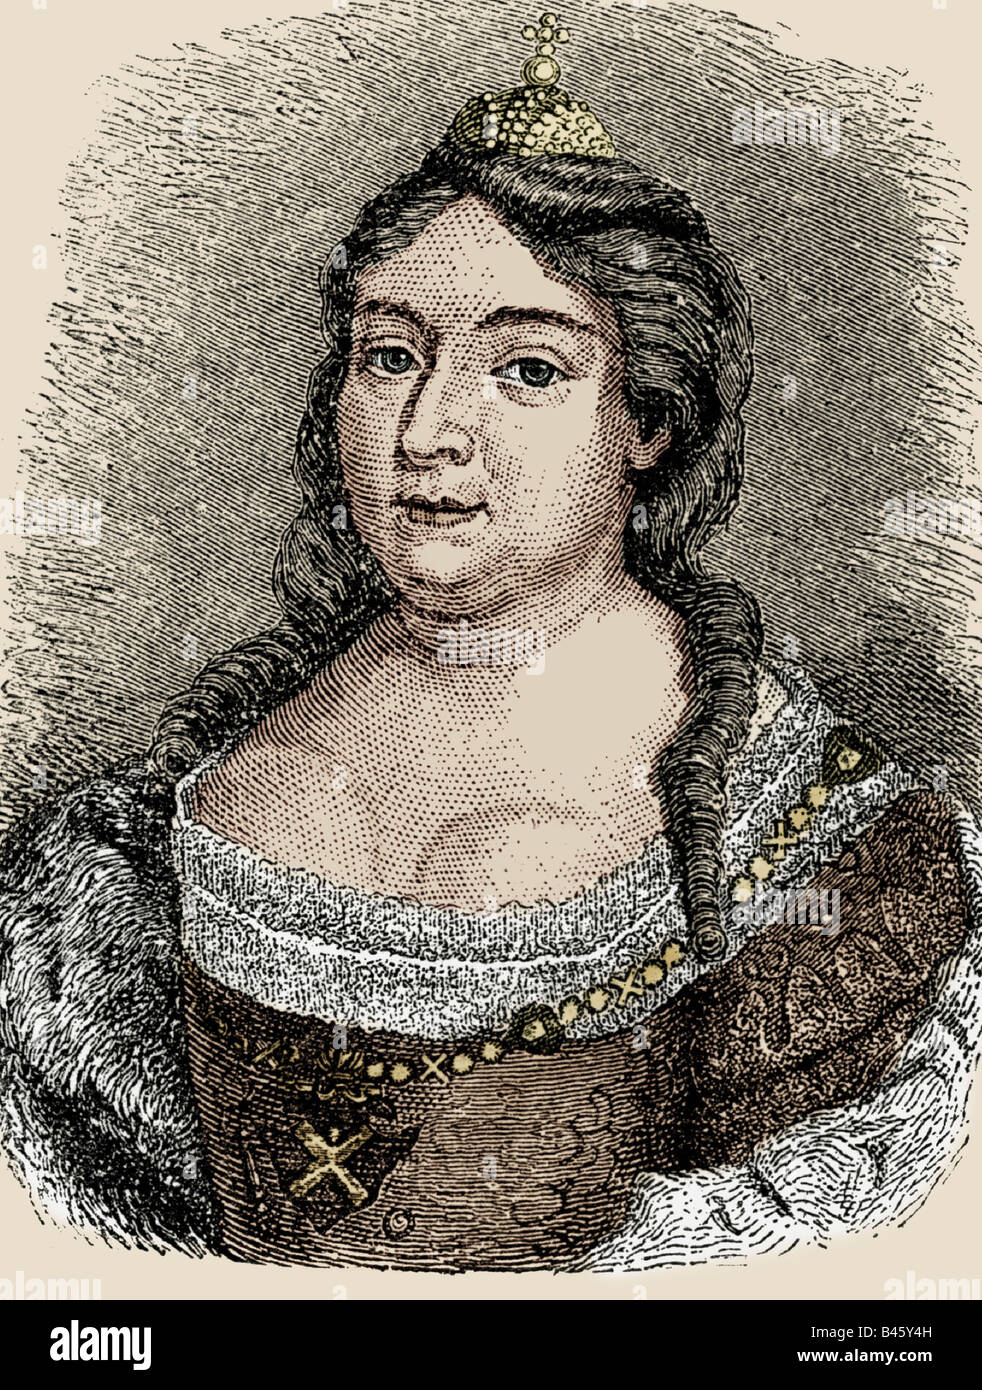 Anna Ivanovna, 25.1.1693 - 28.10.1740, Empress of Russia 25.2.1730 - 28.10.1740, portrait, wood engraving, 19th century, later coloured, , Stock Photo